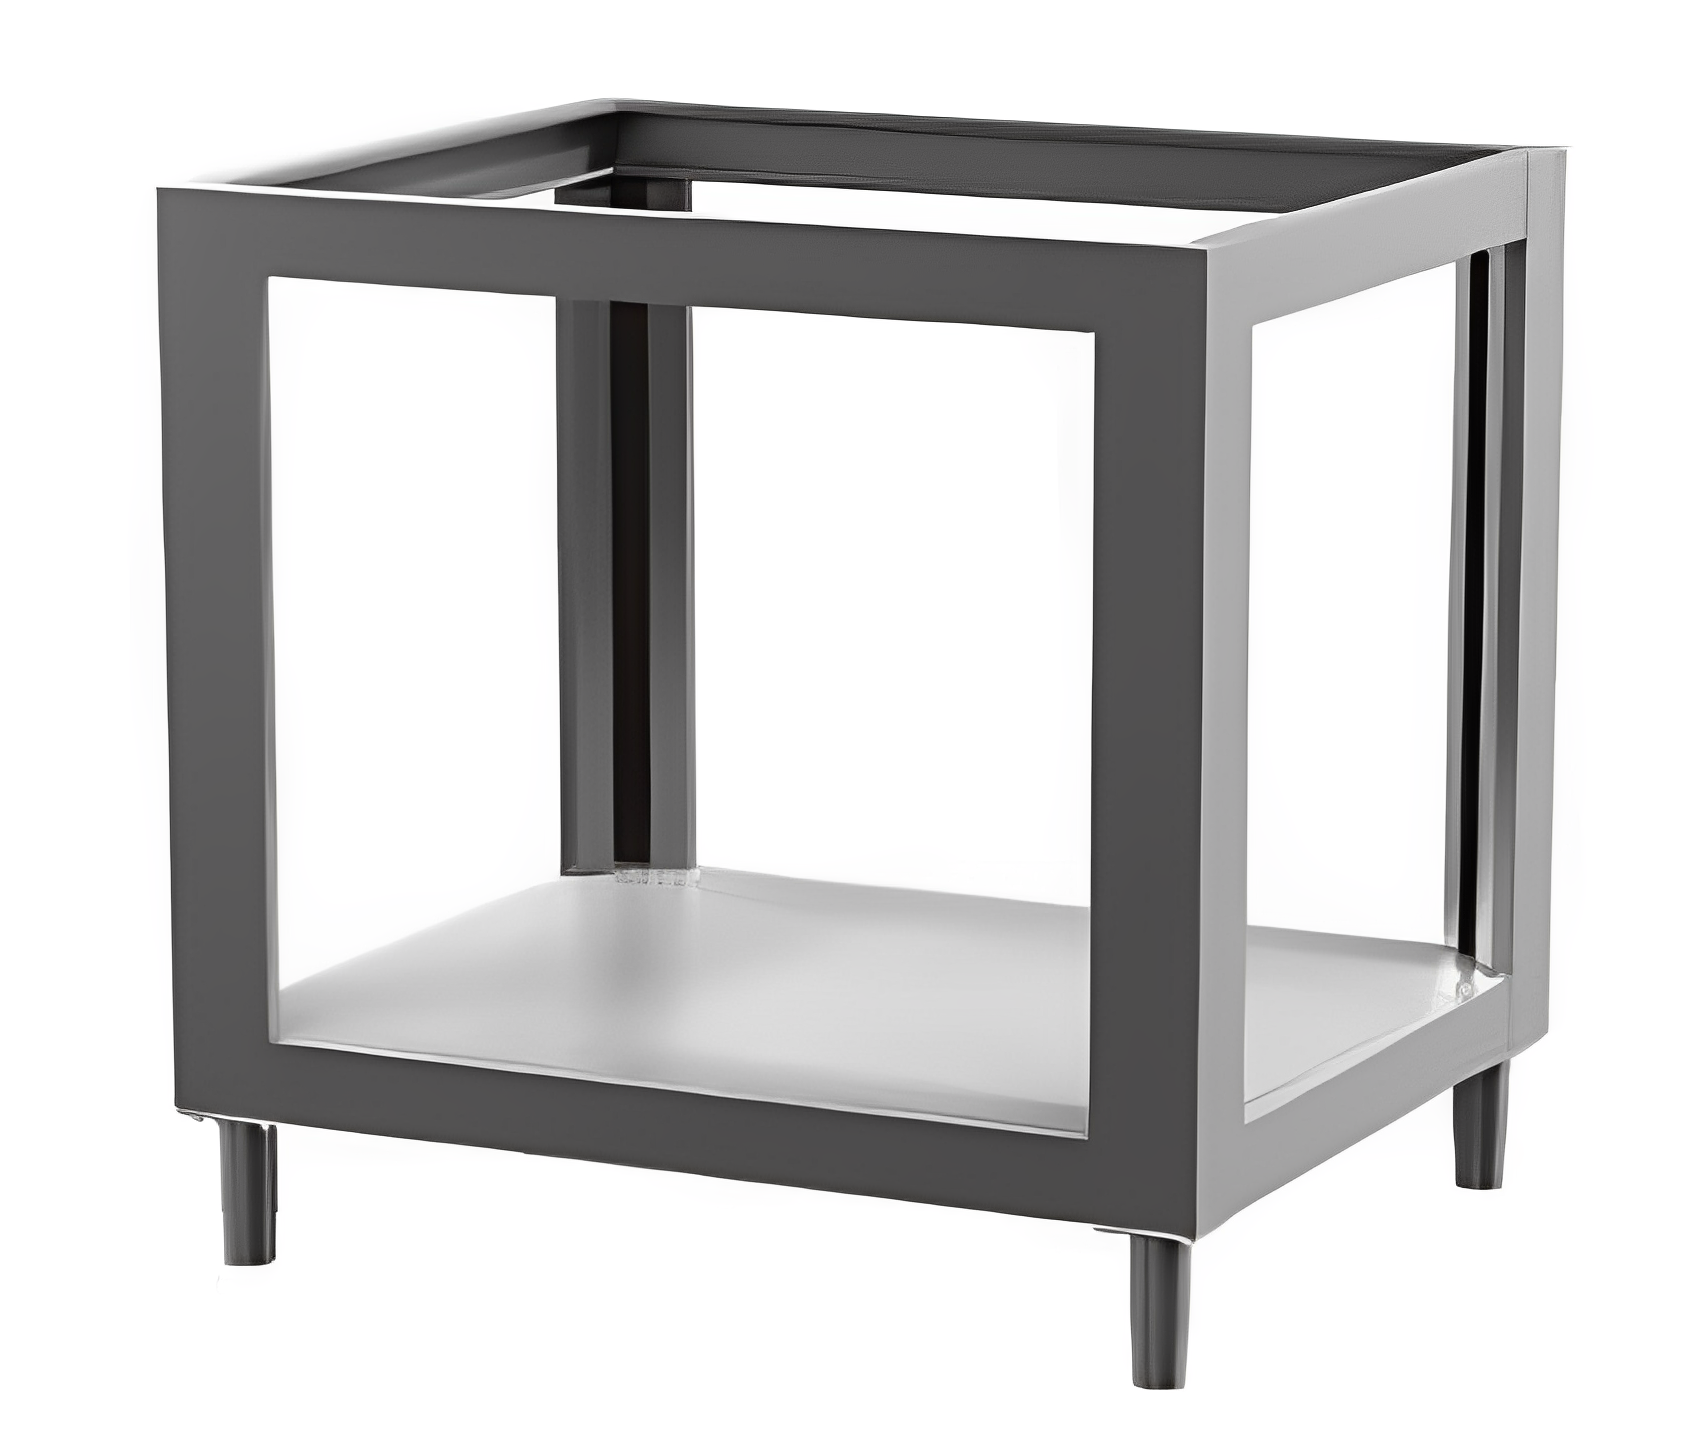 PIZZAGROUP S4+4 Stands in stainless steel, with service shelf.